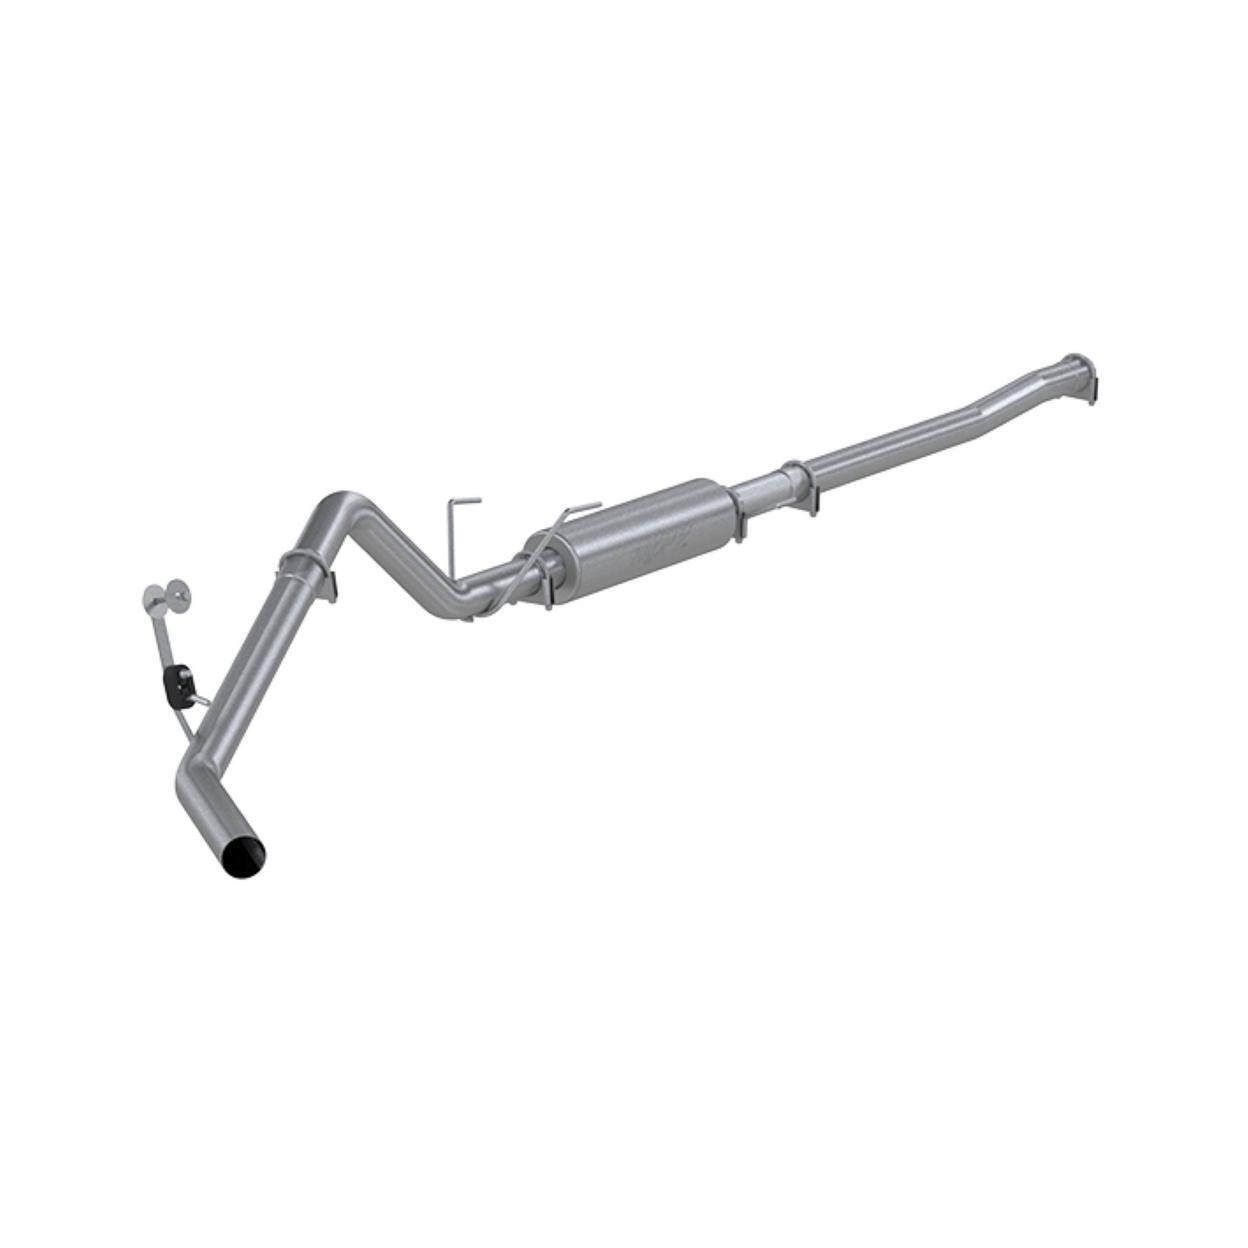 MBRP Exhaust System Kit for 2011-2012 Ram 3500